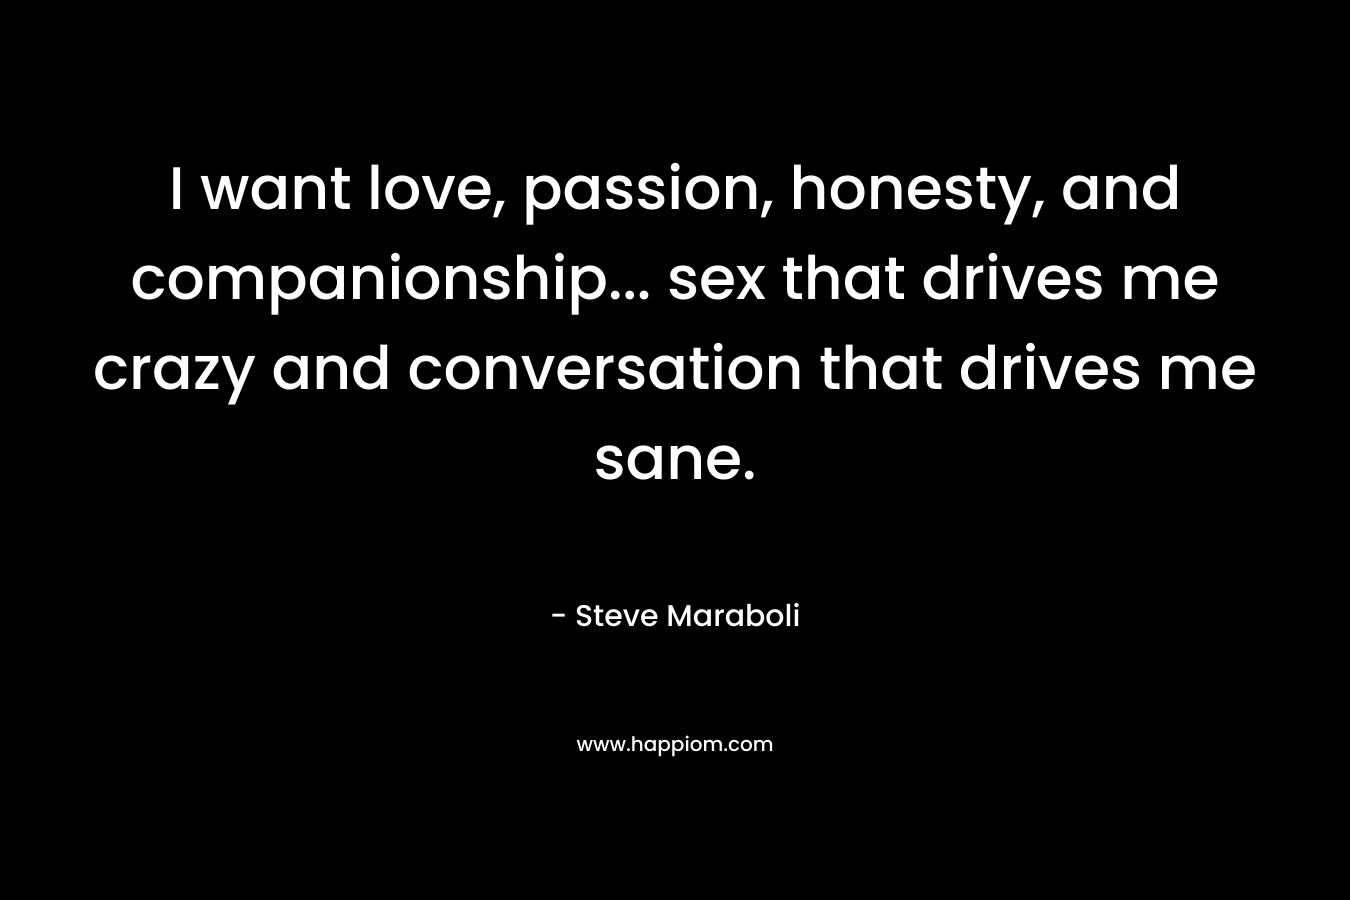 I want love, passion, honesty, and companionship... sex that drives me crazy and conversation that drives me sane.